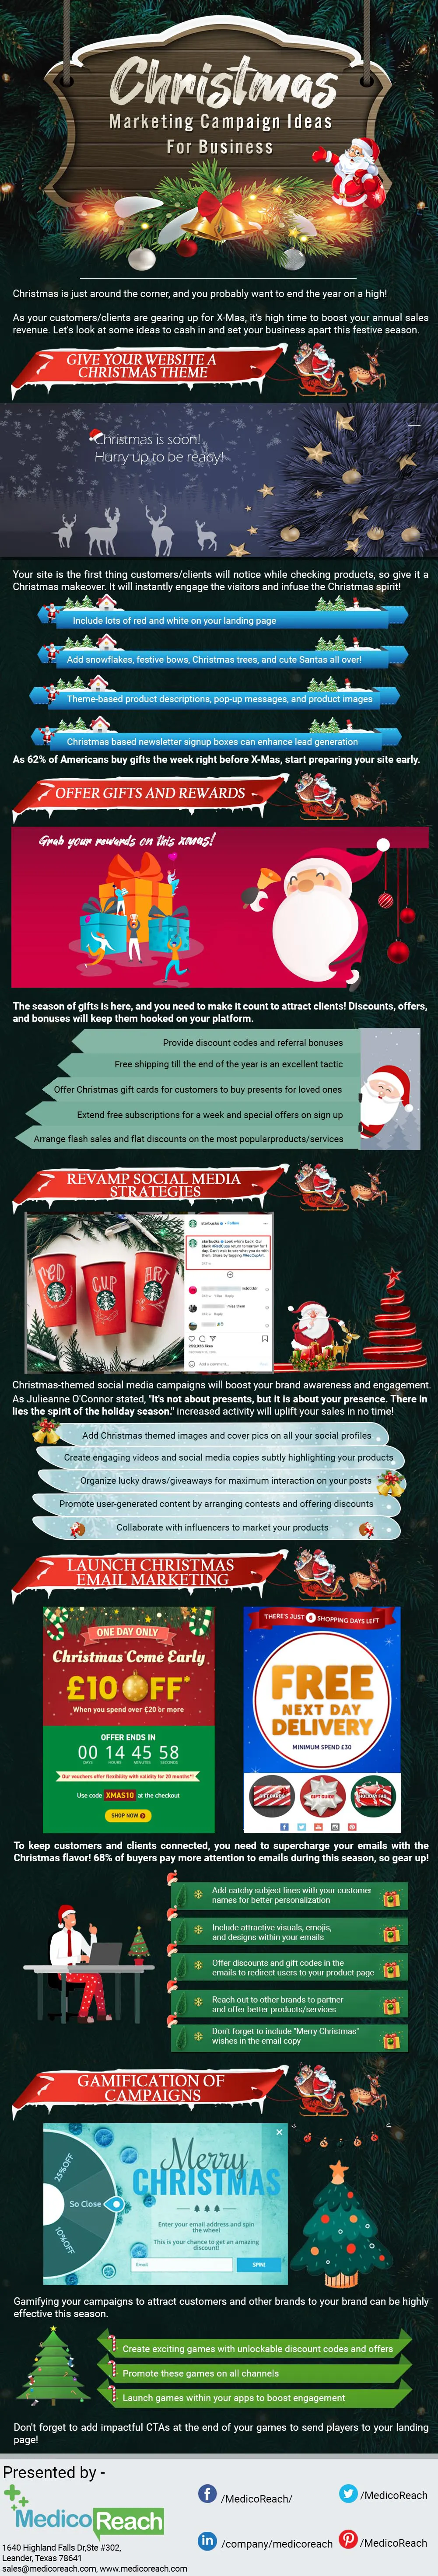 Christmas Marketing Campaigns Infographic